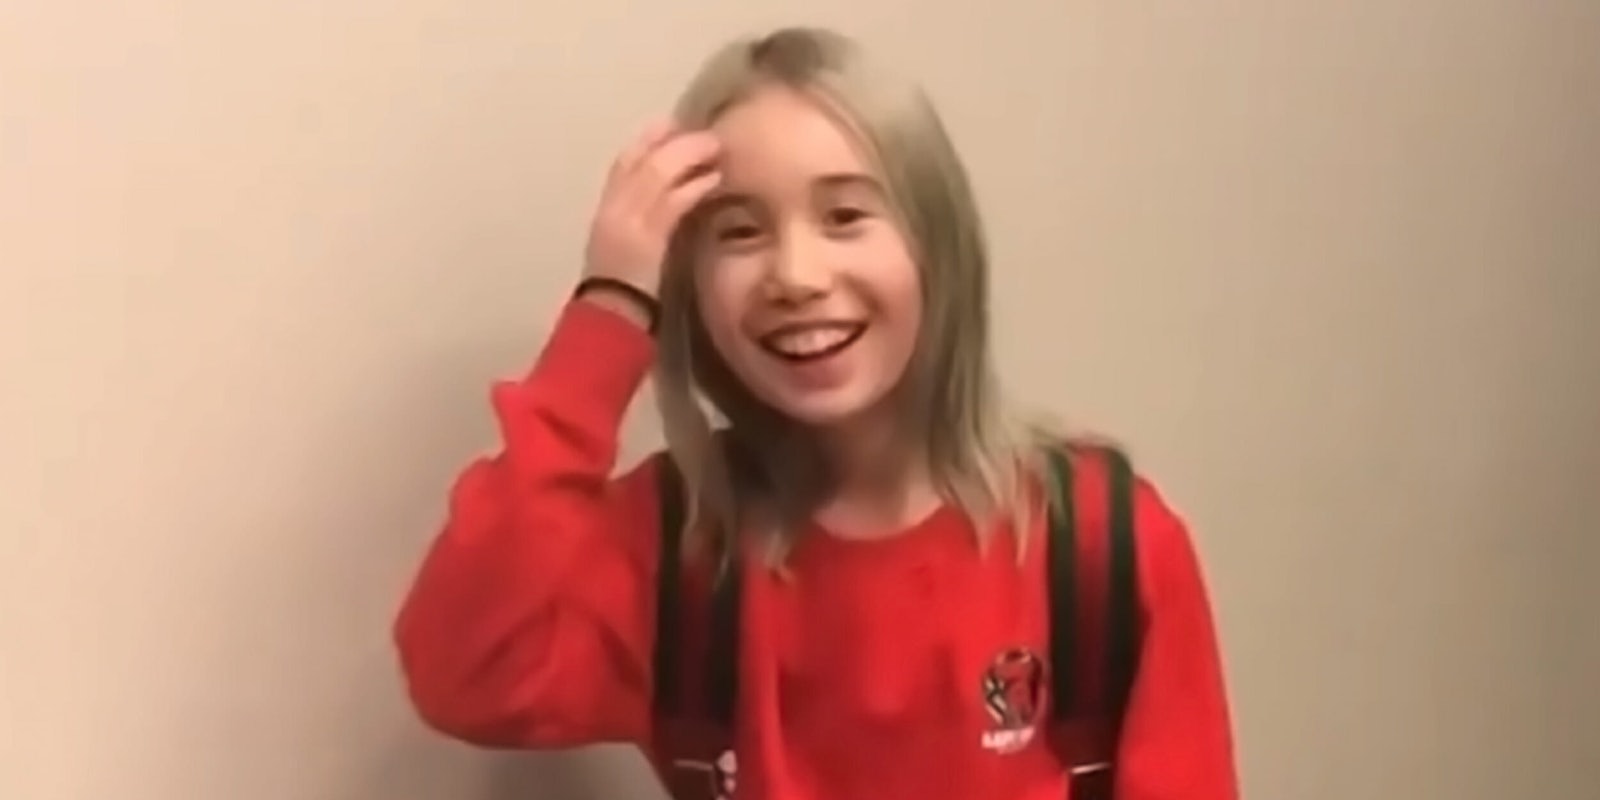 lil tay smiling